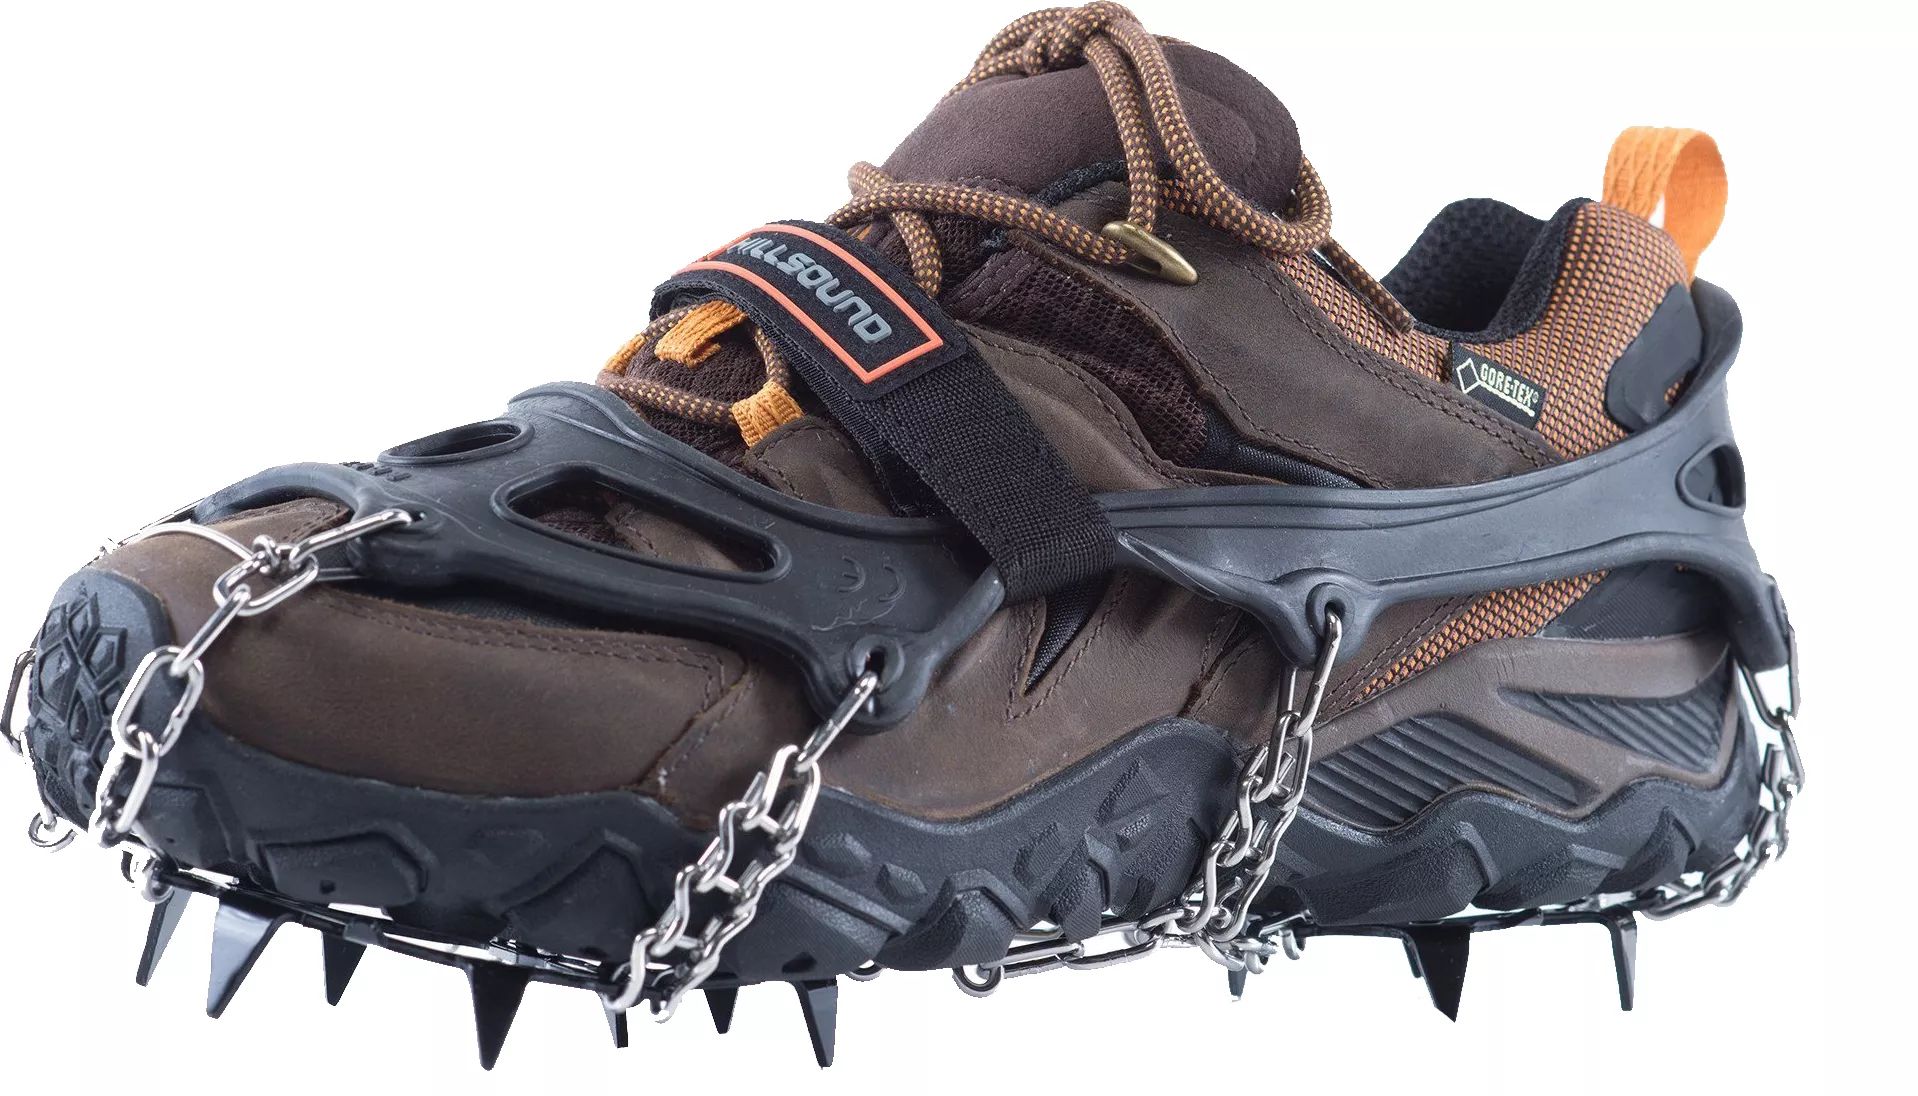 Hillsound Trail Crampon, Size: Small | Dick's Sporting Goods